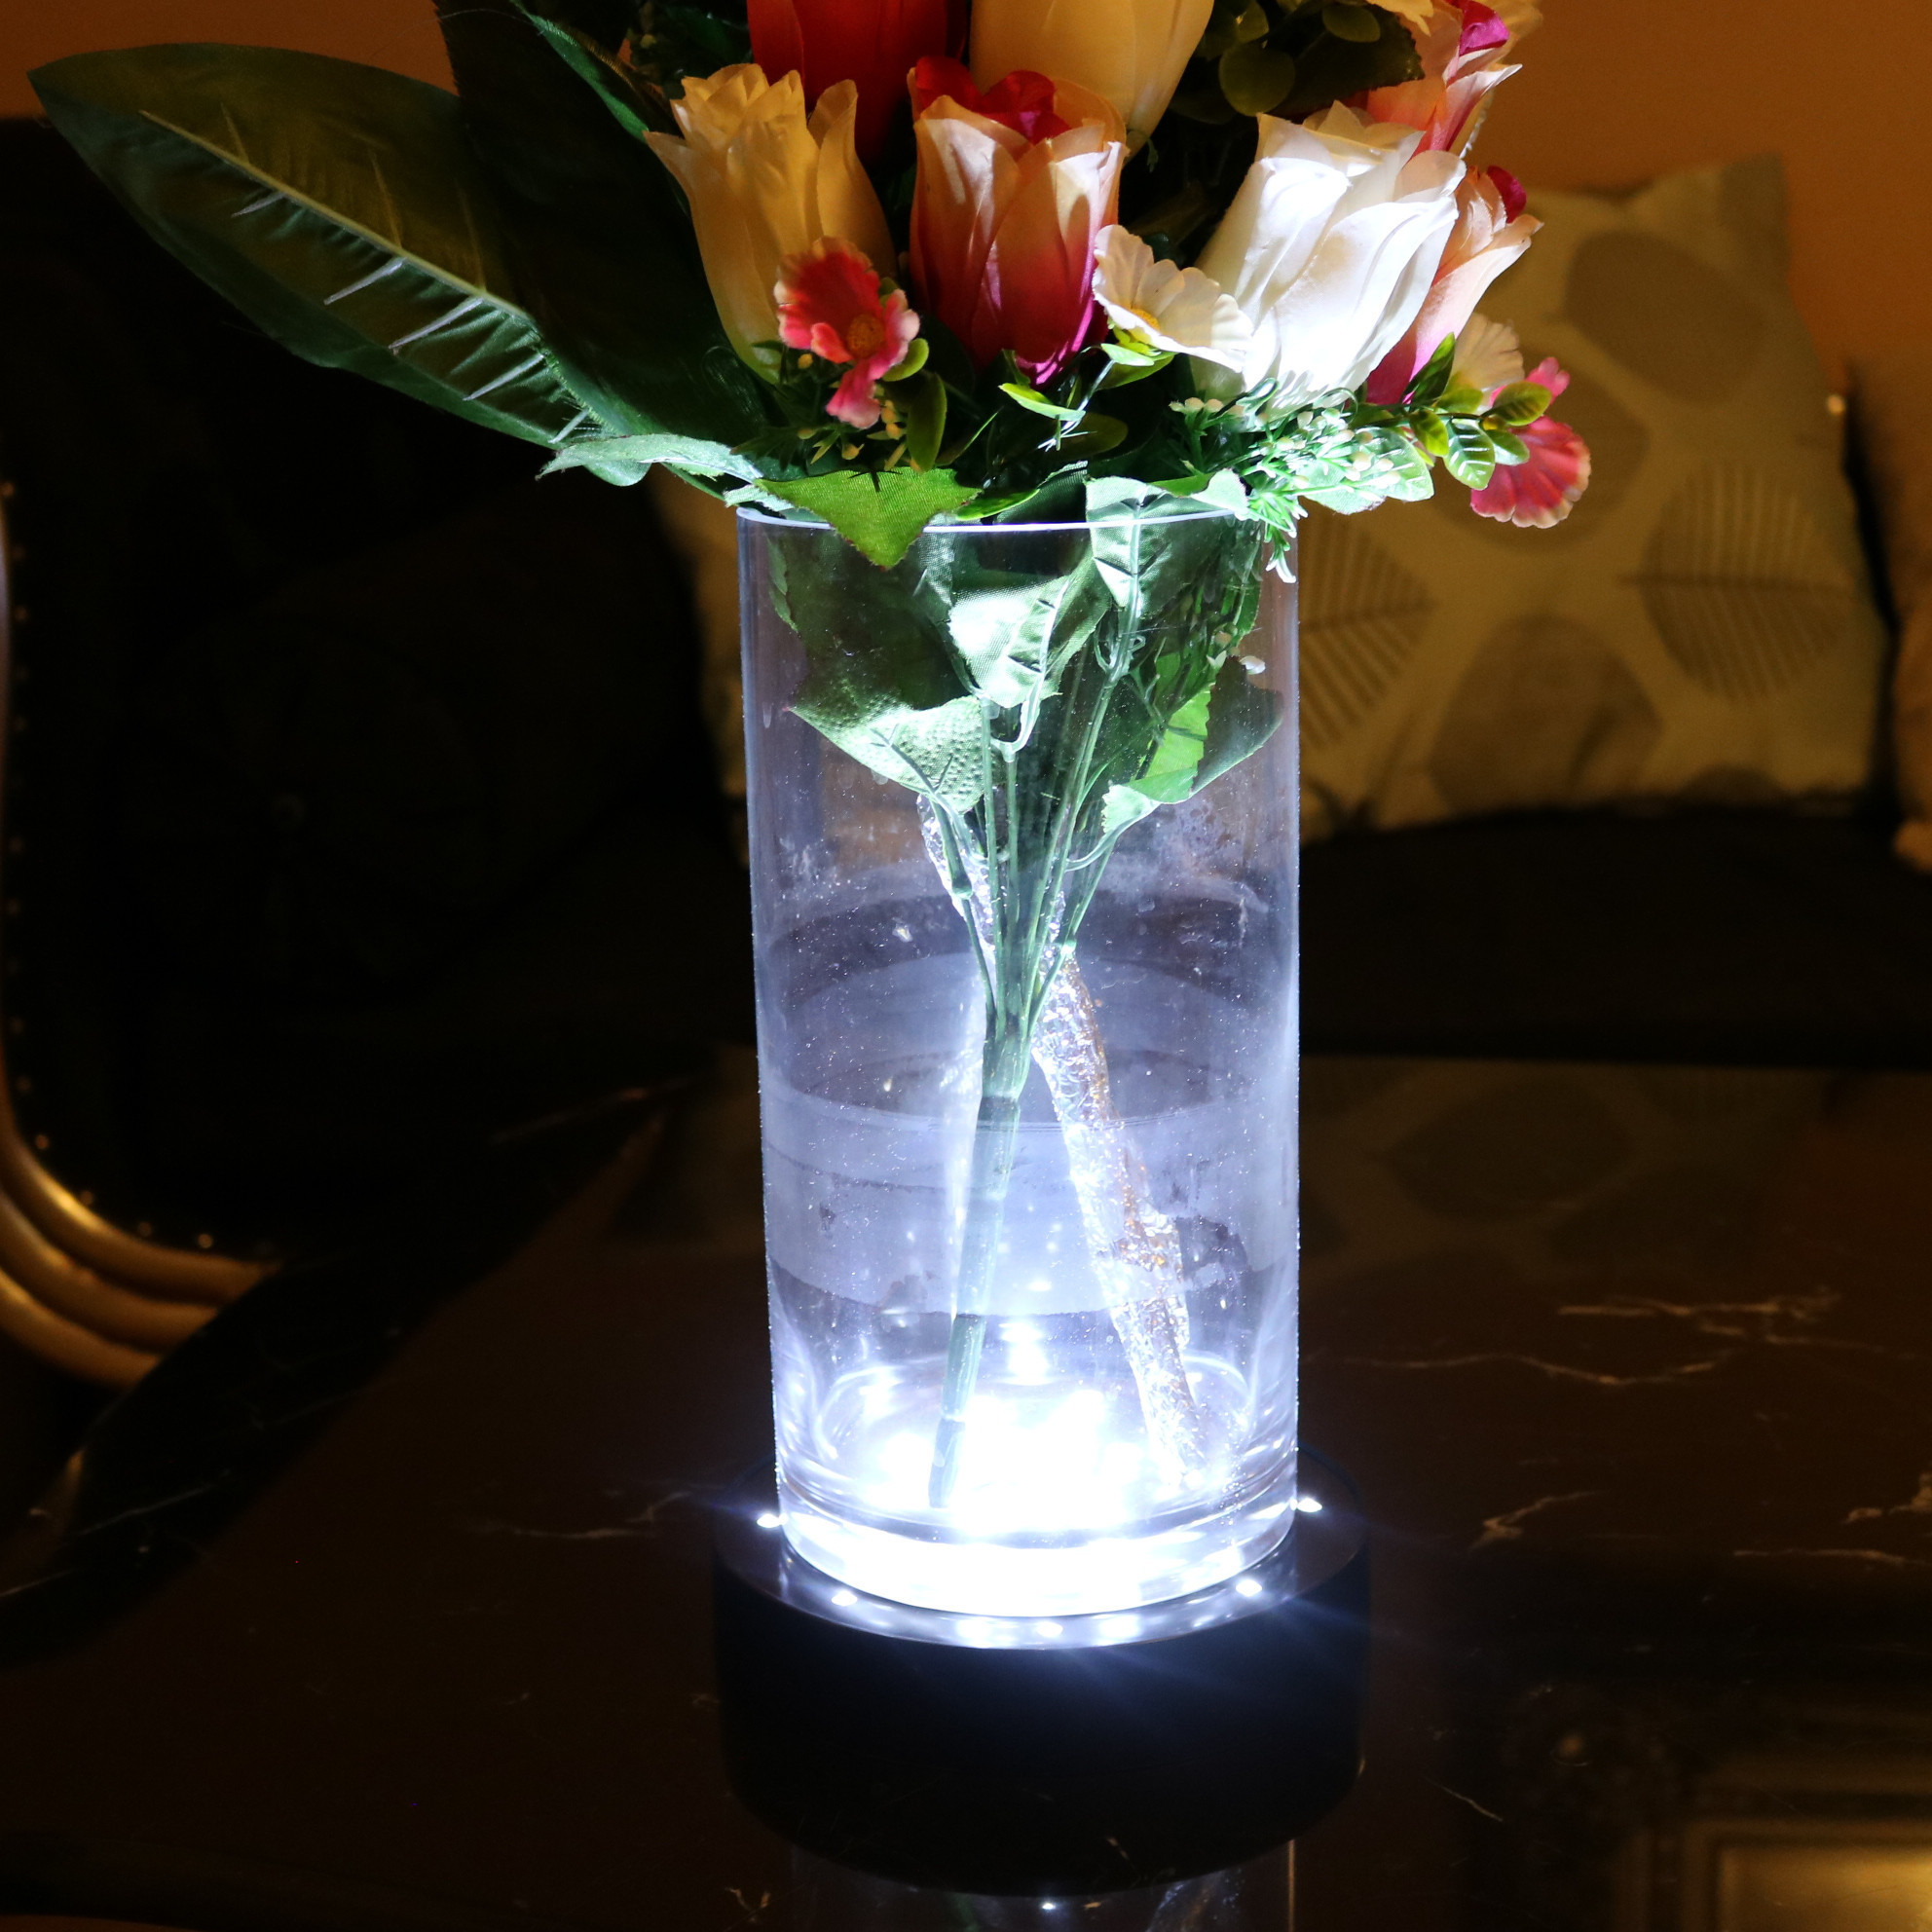 15 Fabulous White Flowers In Glass Vase 2024 free download white flowers in glass vase of flower table lamp new led cylinder vase 13 4h vases lighted 3 4 pertaining to flower table lamp new 2012 10 12 09 27 47h vases artificial flowers in vase with